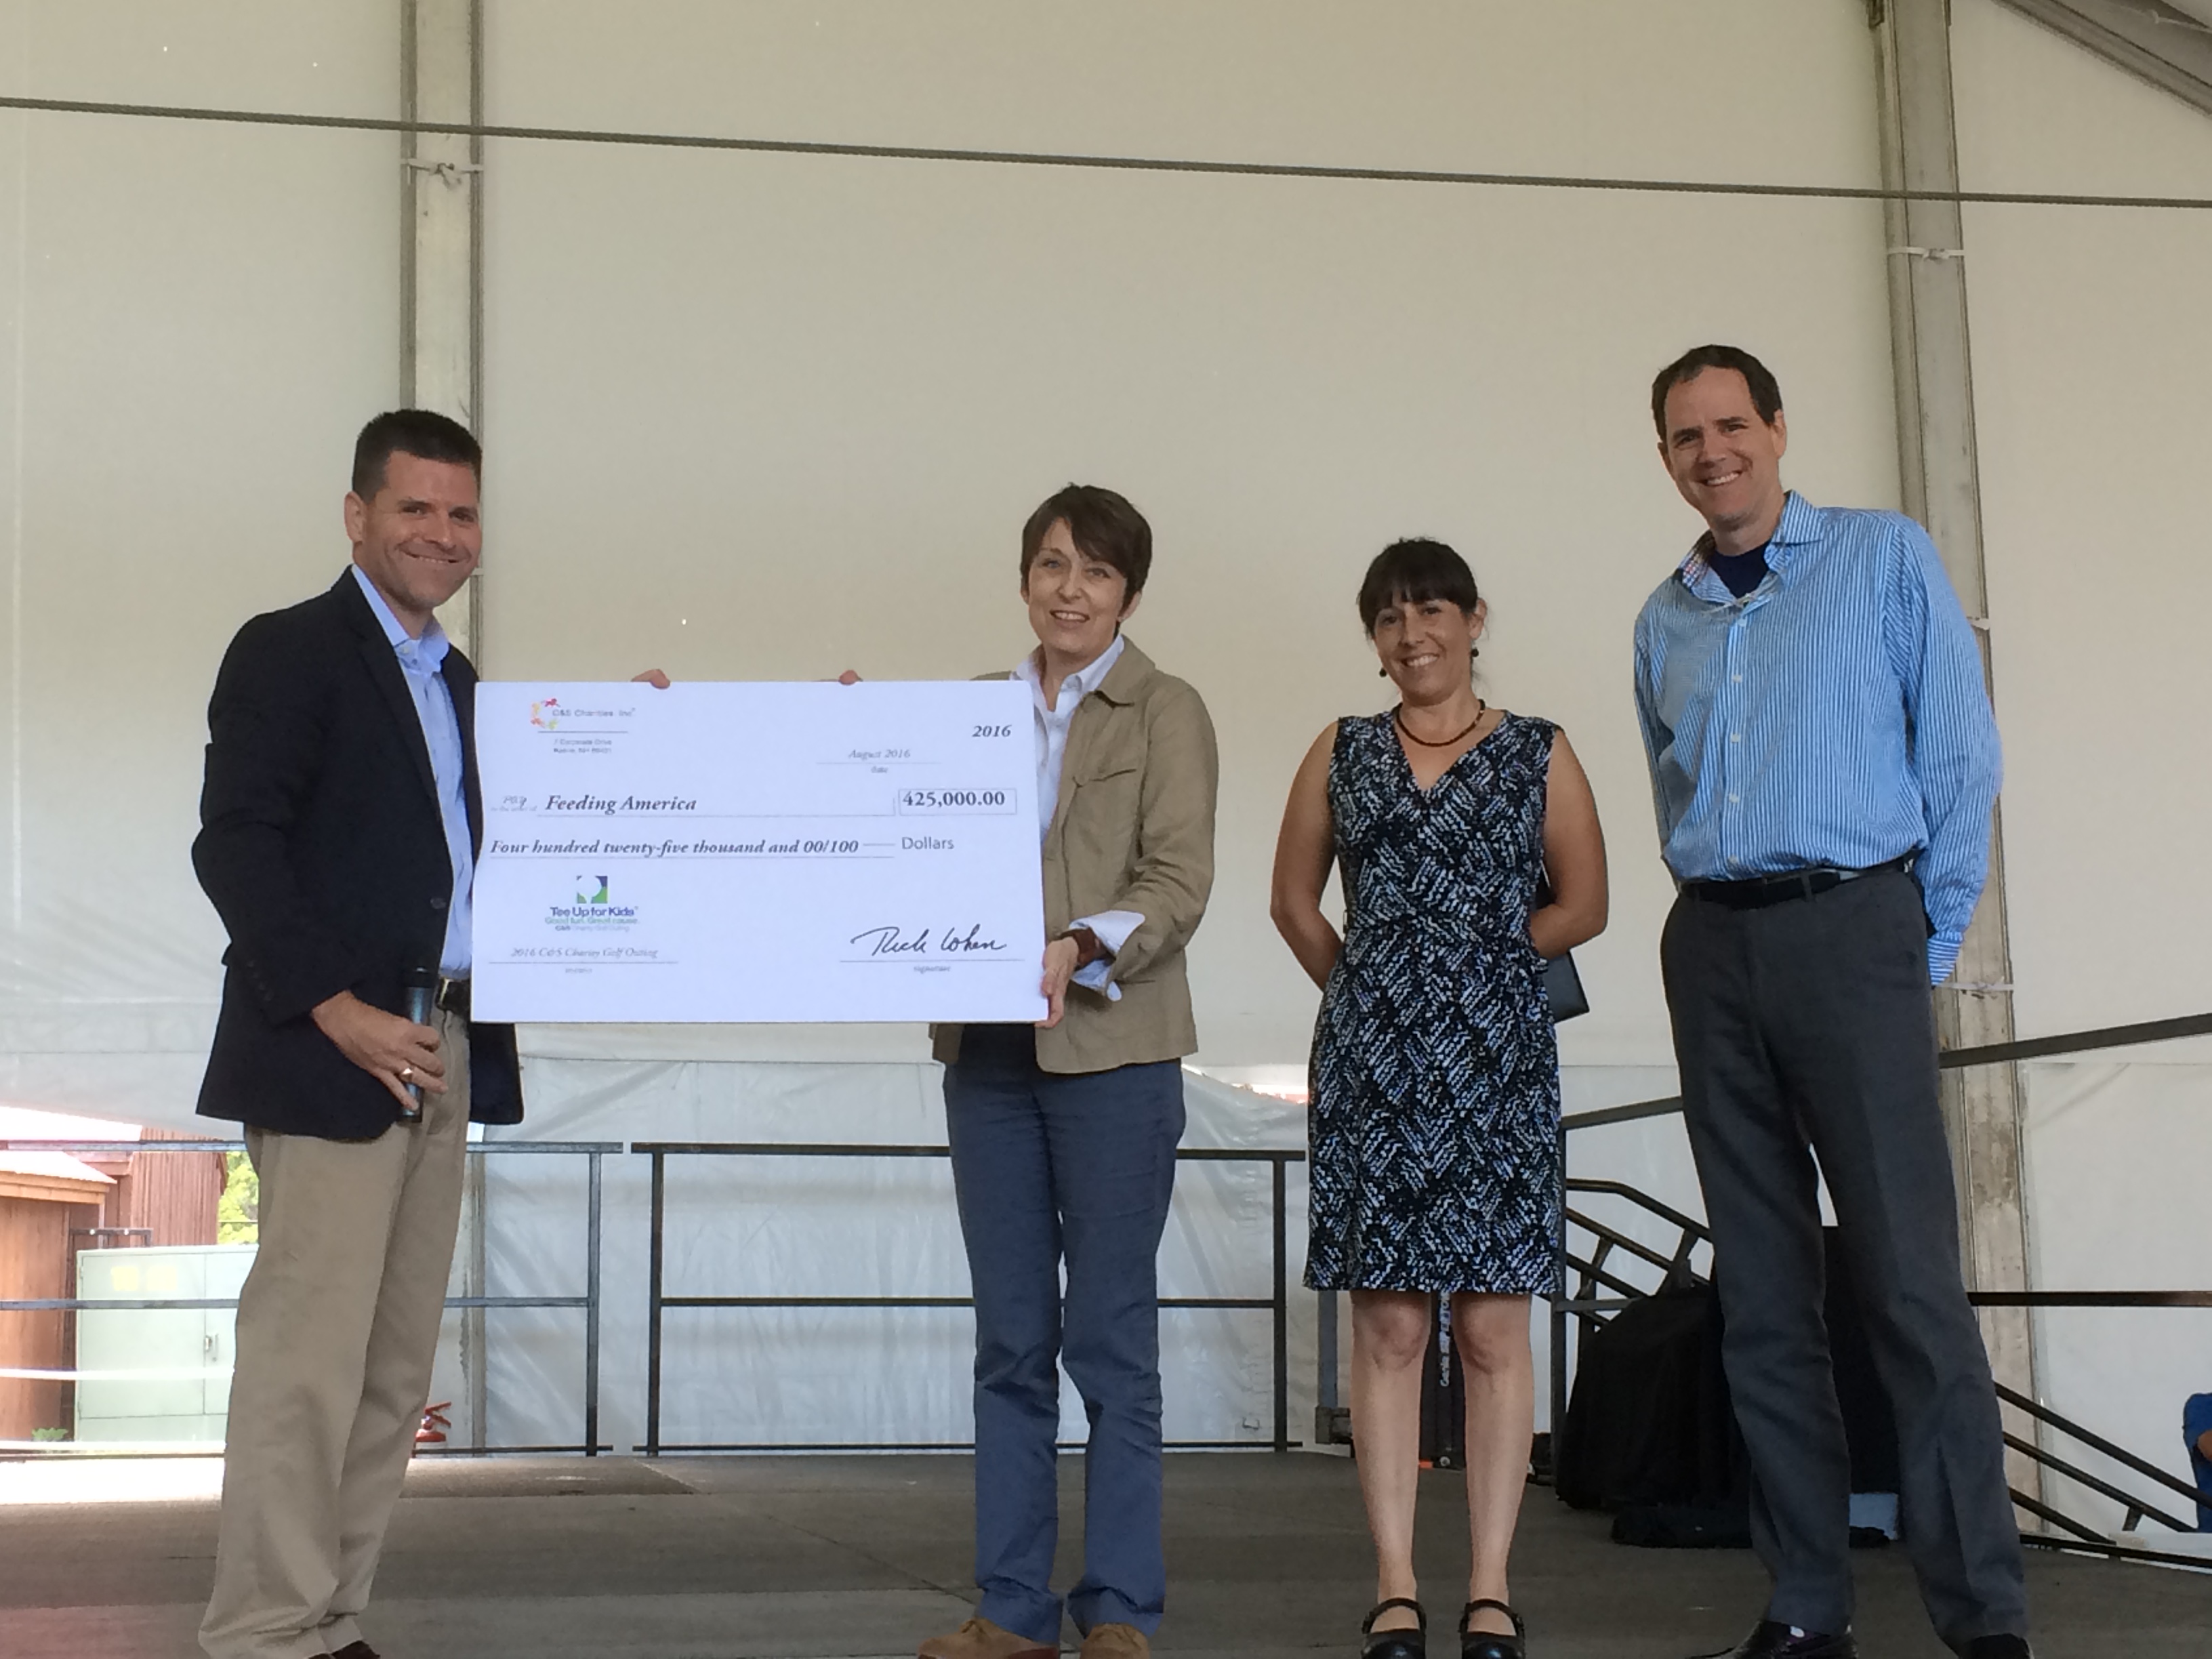 Bryan Granger, C&S Charities secretary (left), presented a ceremonial check to representatives of Feeding America, one of six nonprofit organizations honored at the Tee Up for Kids™ Golf Outing.